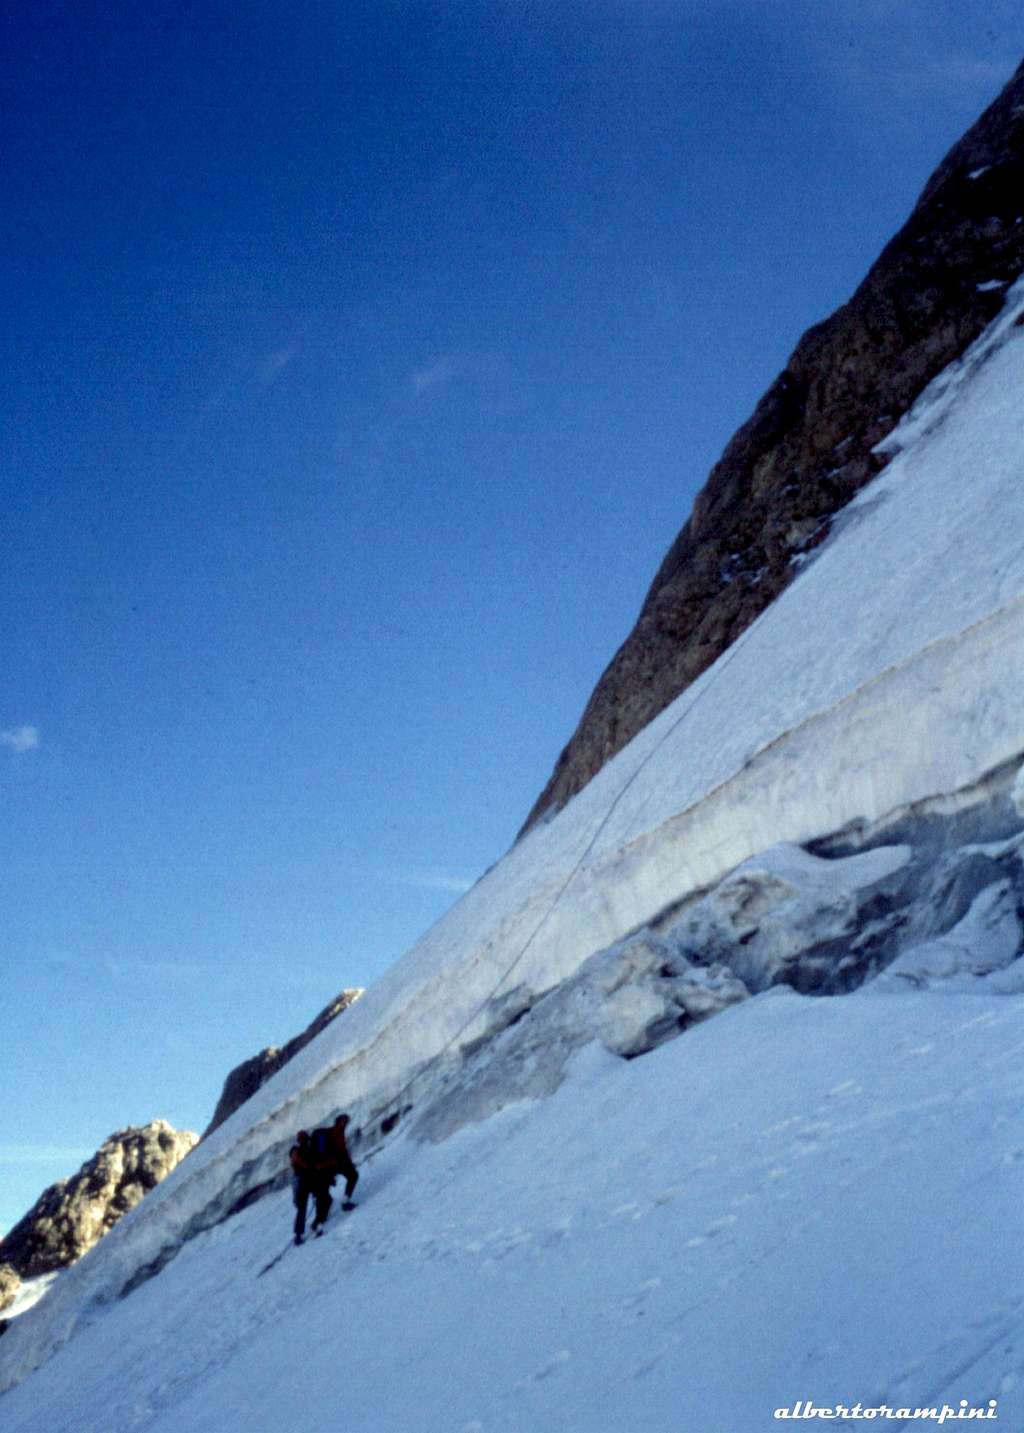 Marmolada d'Ombretta, the descent on Northern side